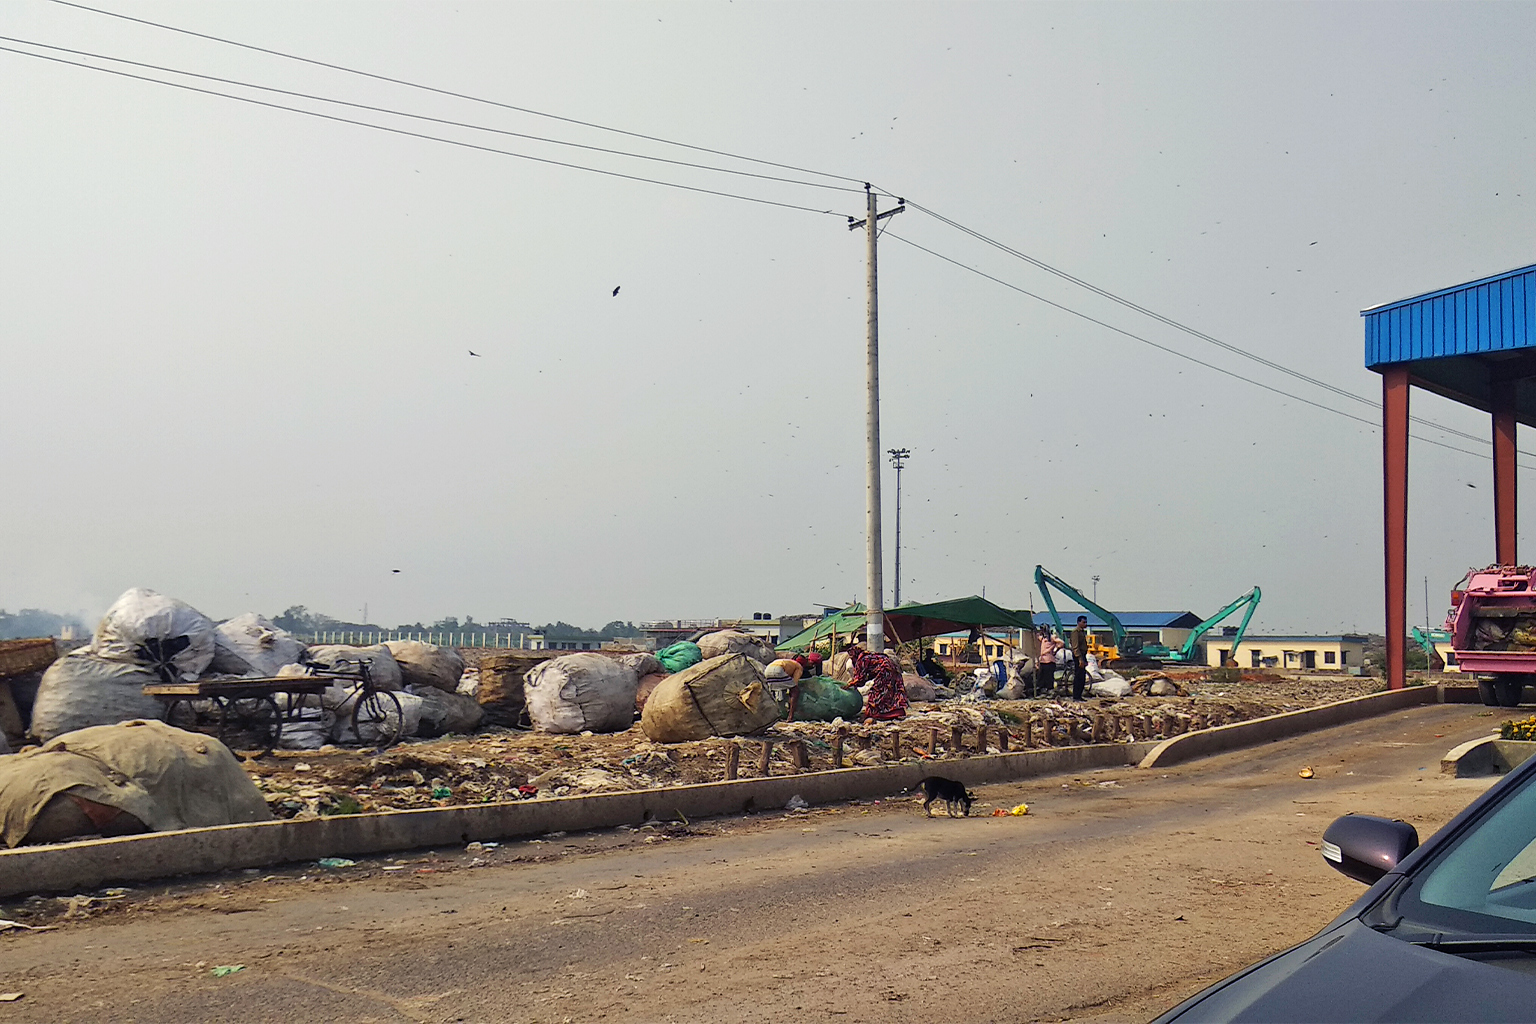 Waste dumped next to a highway in Bangladesh.